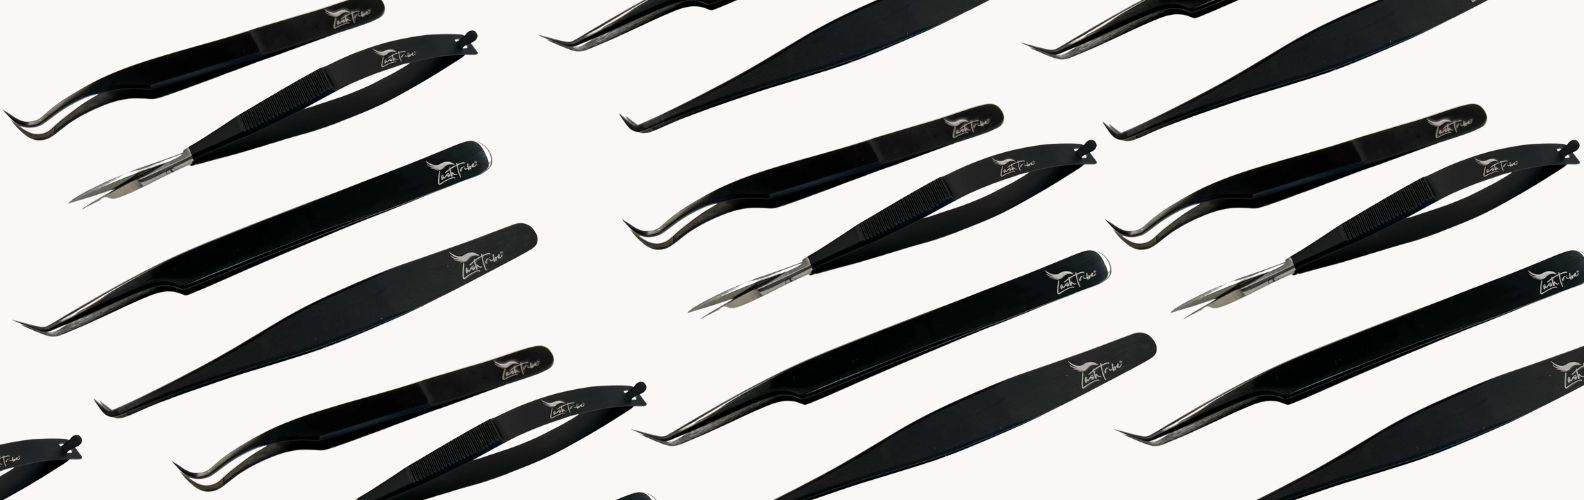 Chart of several classic beginners tweezers, including some black scissors